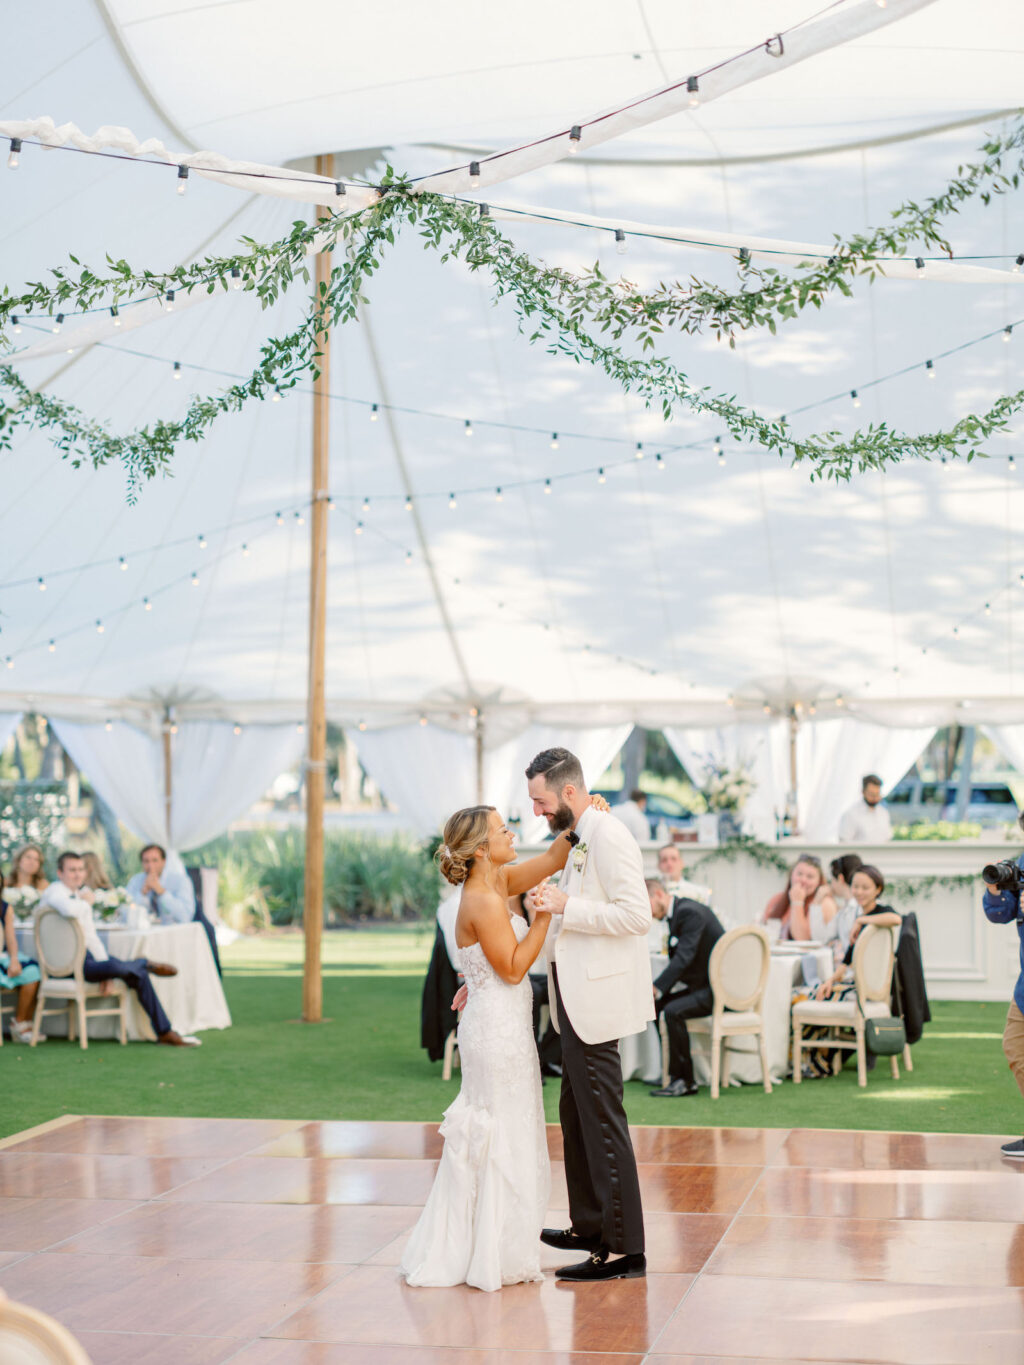 Sarasota Bride and Groom First Dance in Sperry Tented Garden Reception with Market Lighting and Hanging Greenery | Florida Wedding Venue The Resort at Longboat Key Club | South Harbourside Lawn